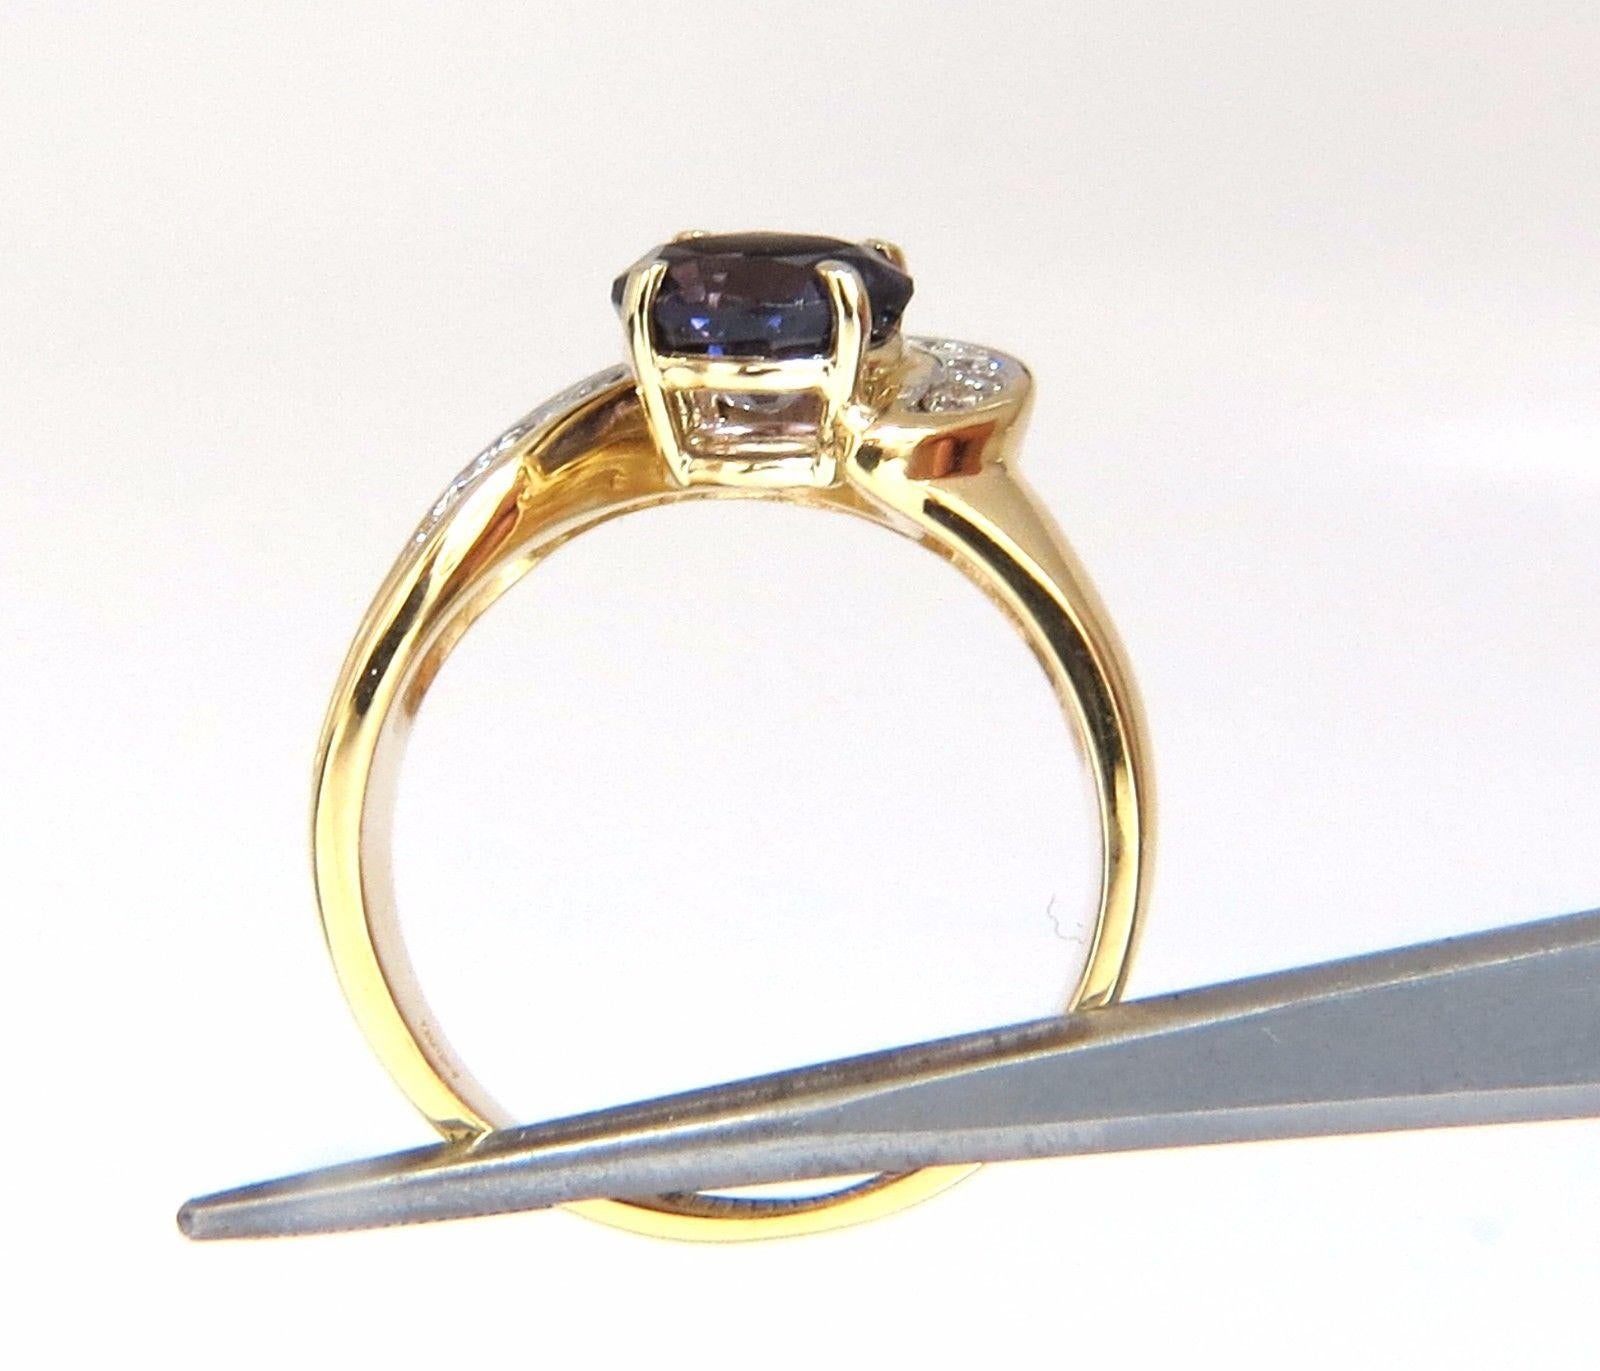 2.26ct. Natural Purple Spinel diamond ring

8 x 7.8mm

Round, Brilliant cut

Transparent / Vivid Purple color & clean clarity.

.40ct Round, full cut diamonds:

G color, vs-2 clarity.

14kt. yellow gold.

9.3 Grams

Ring .50 inch wide.

Depth of